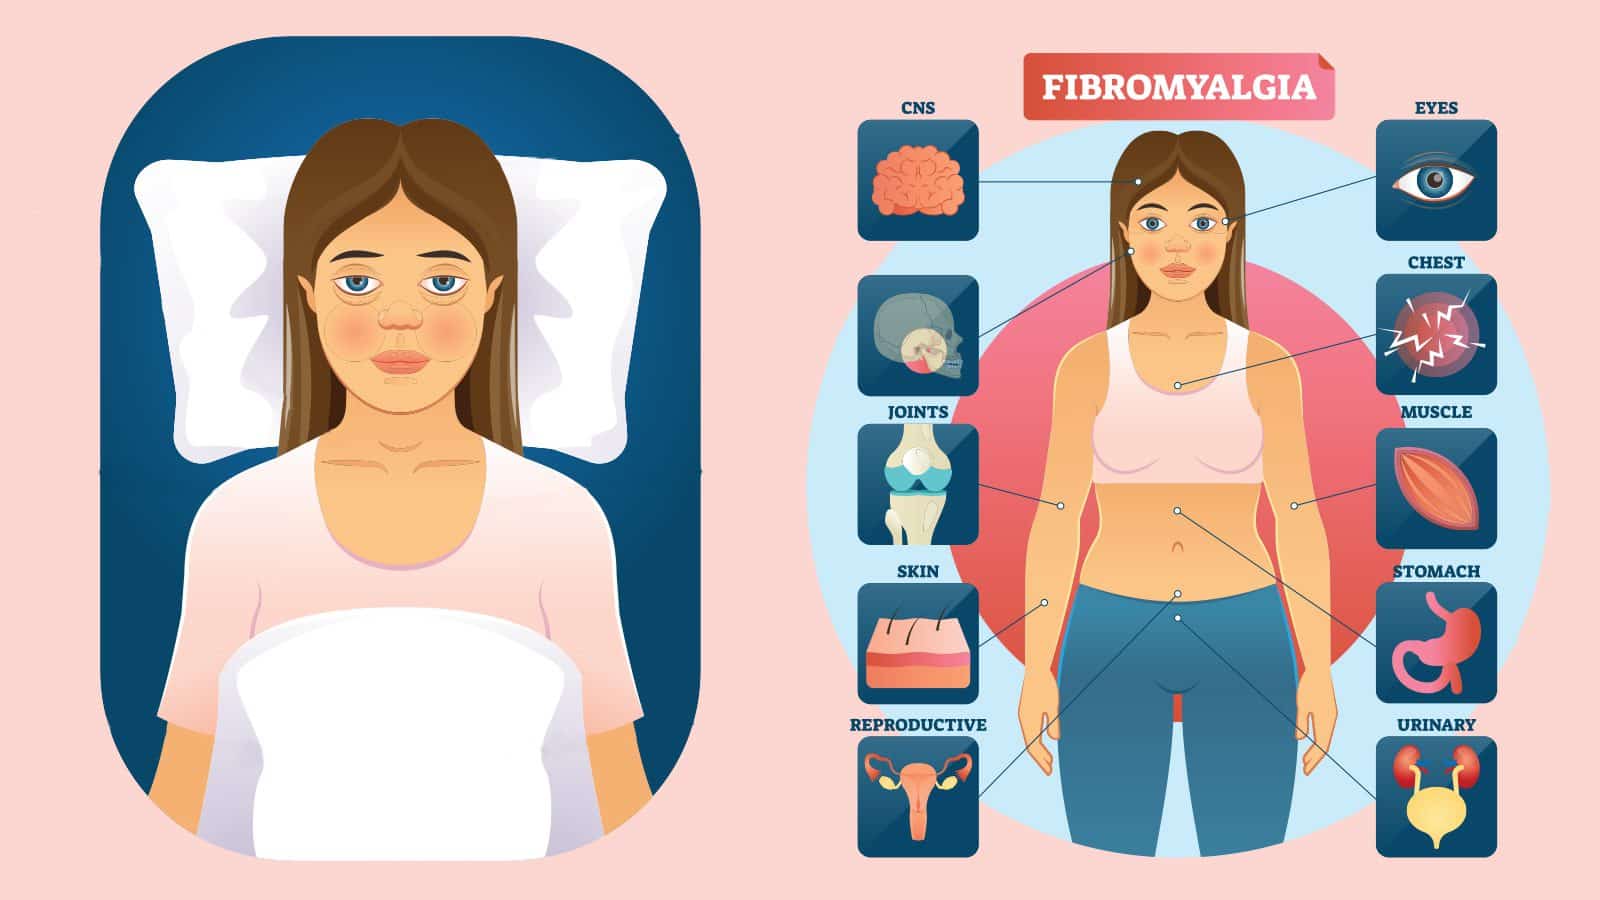 10 Signs of Fibromyalgia to Never Ignore